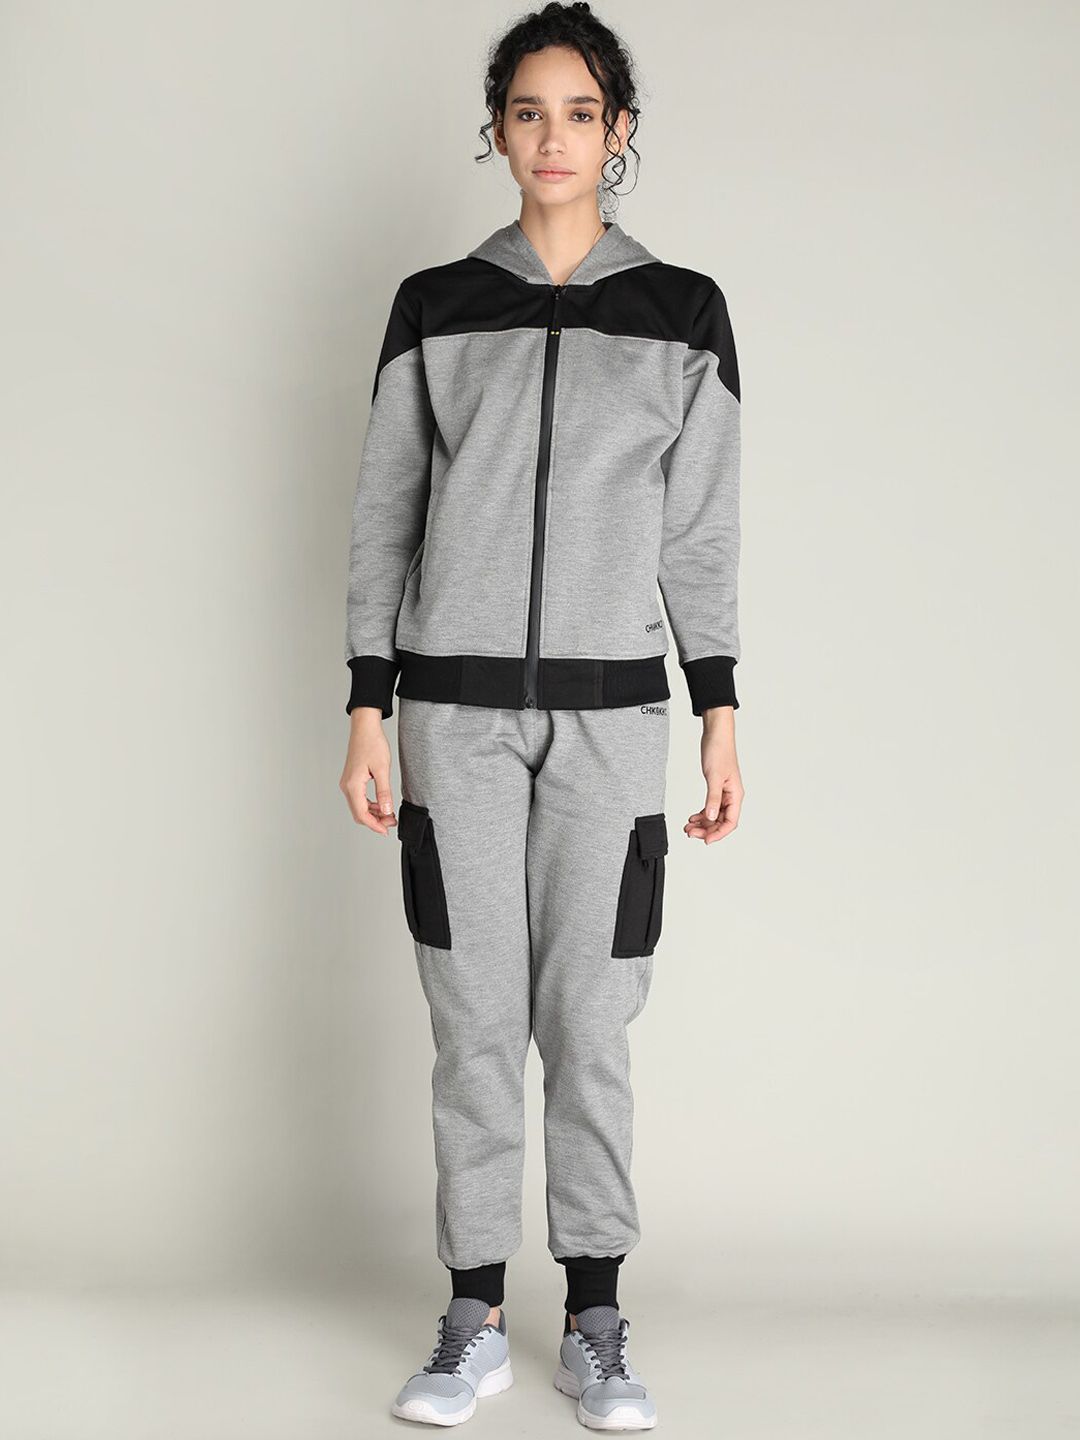 CHKOKKO Women Black and Grey Colourblocked Hooded Tracksuit Price in India